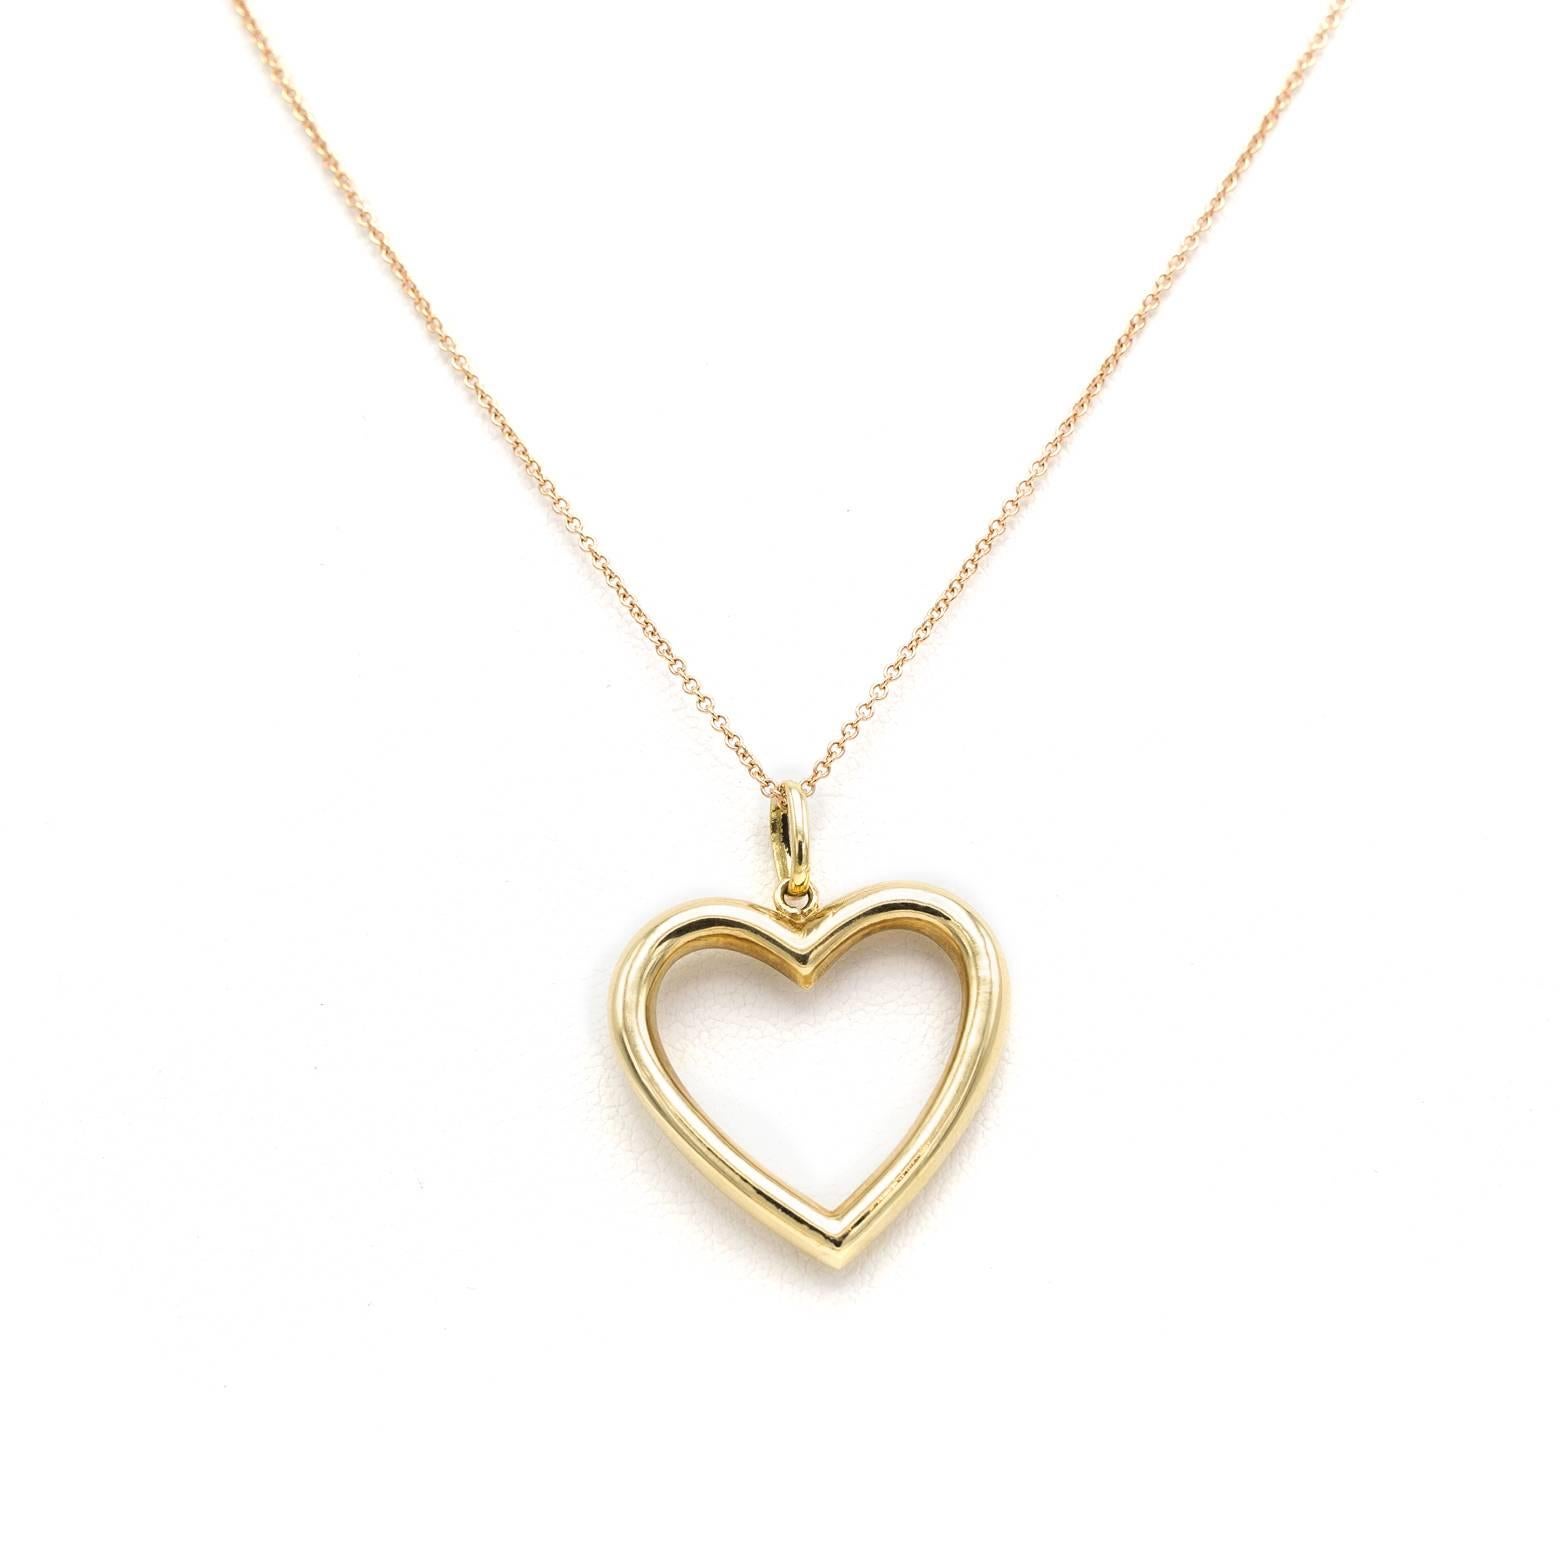 This gorgeous retro and vintage heart shaped pendant is a stunning classic! Substantial in size this pendant is perfect to wear on a regular basis and is fun to wear layered with other necklaces. Pictured here on a 20